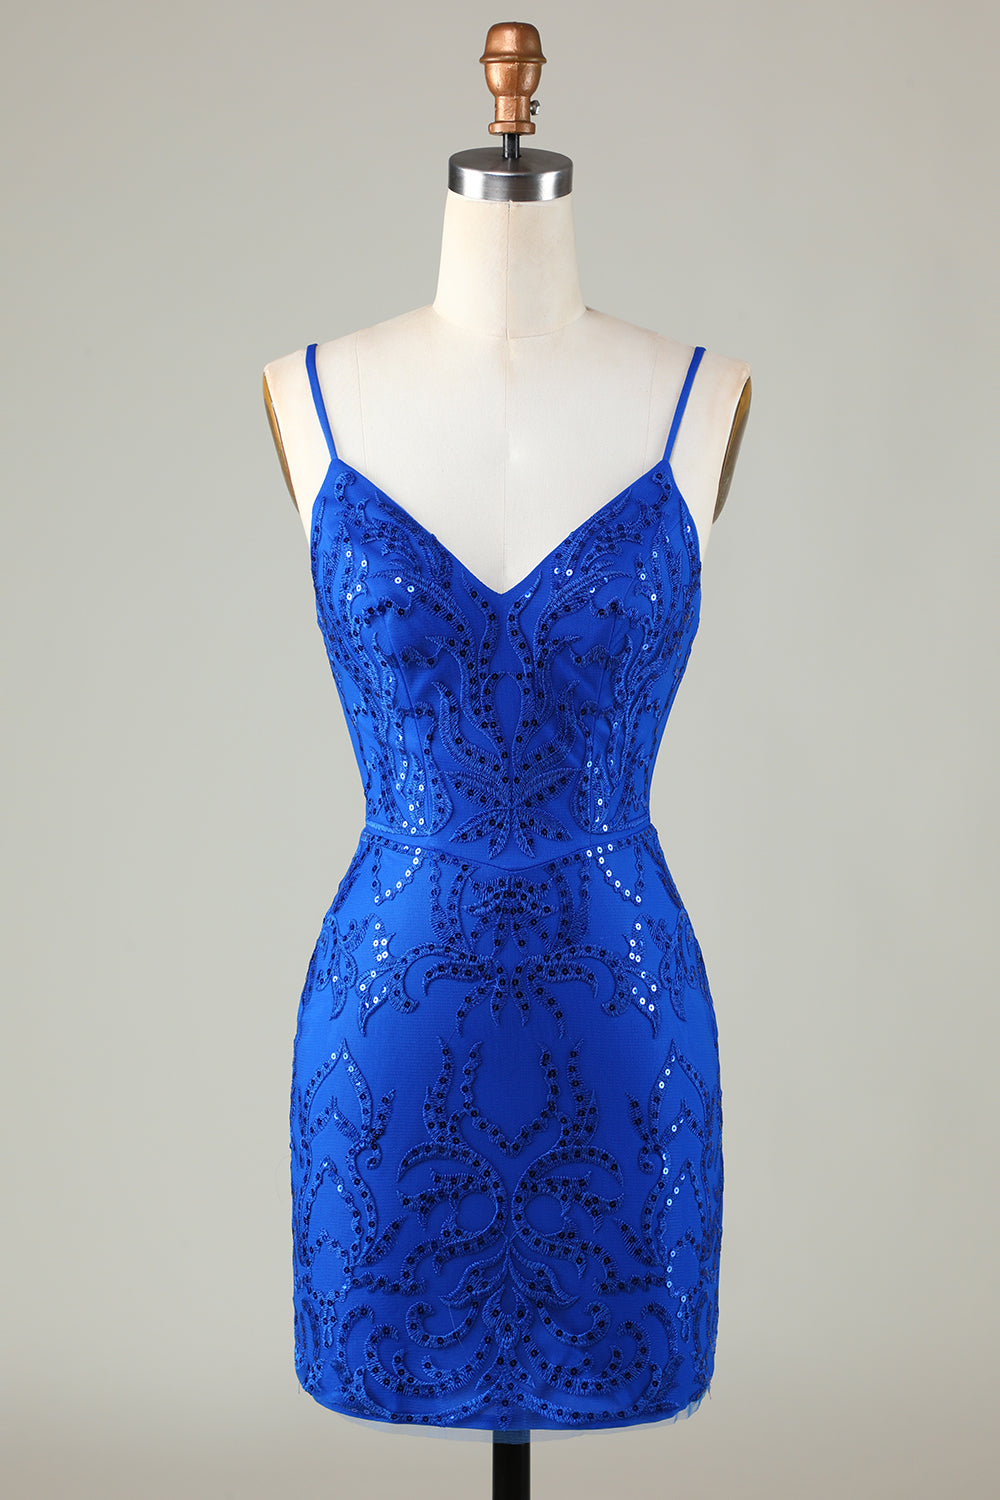 Sparkly Royal Blue Sequins Spaghetti Straps Tight Short Cocktail Dress